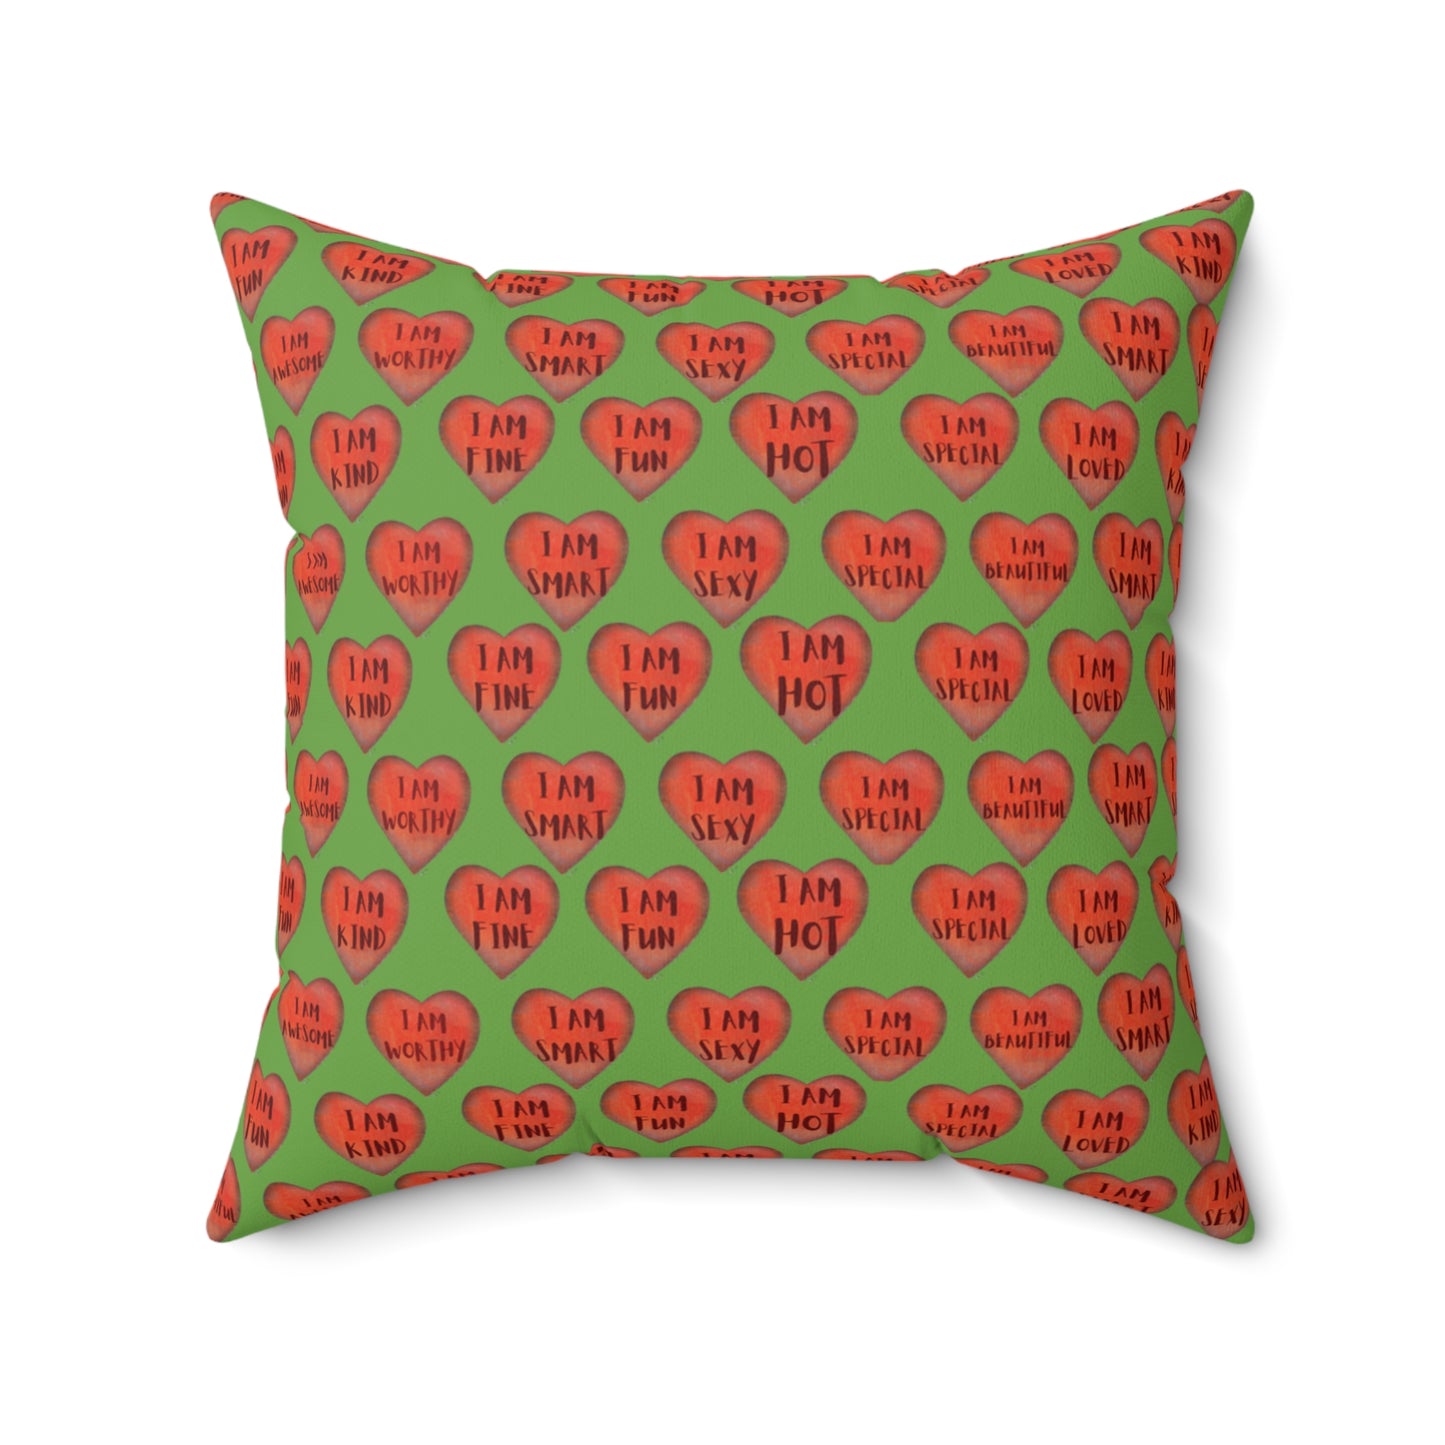 Colorful Faux Suede Pillow - Red Heart motivational pillow - Green Throw Pillow - Inspirational Decorative pillow